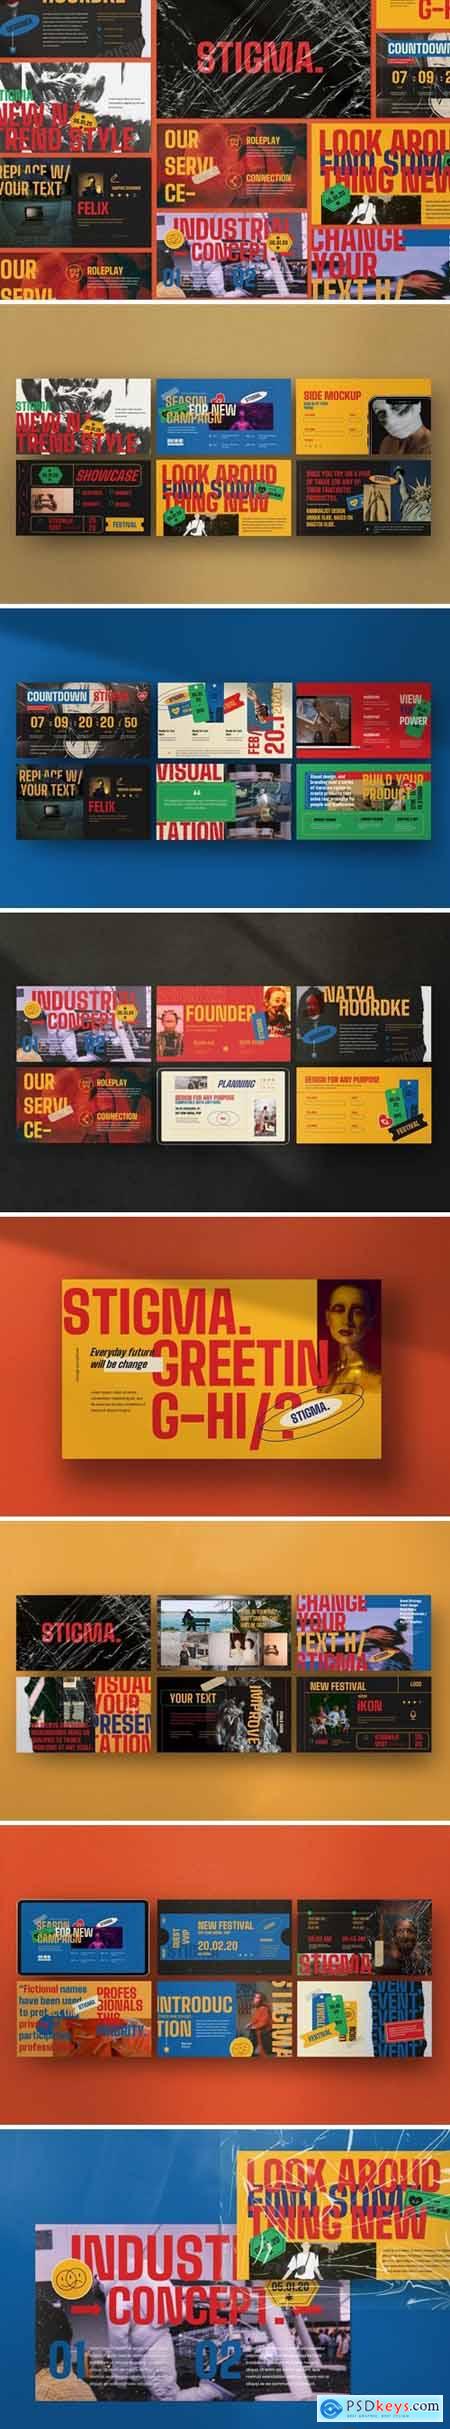 STIGMA - Creative Agency Powerpoint, Keynote and Google Slides Corporate Templates